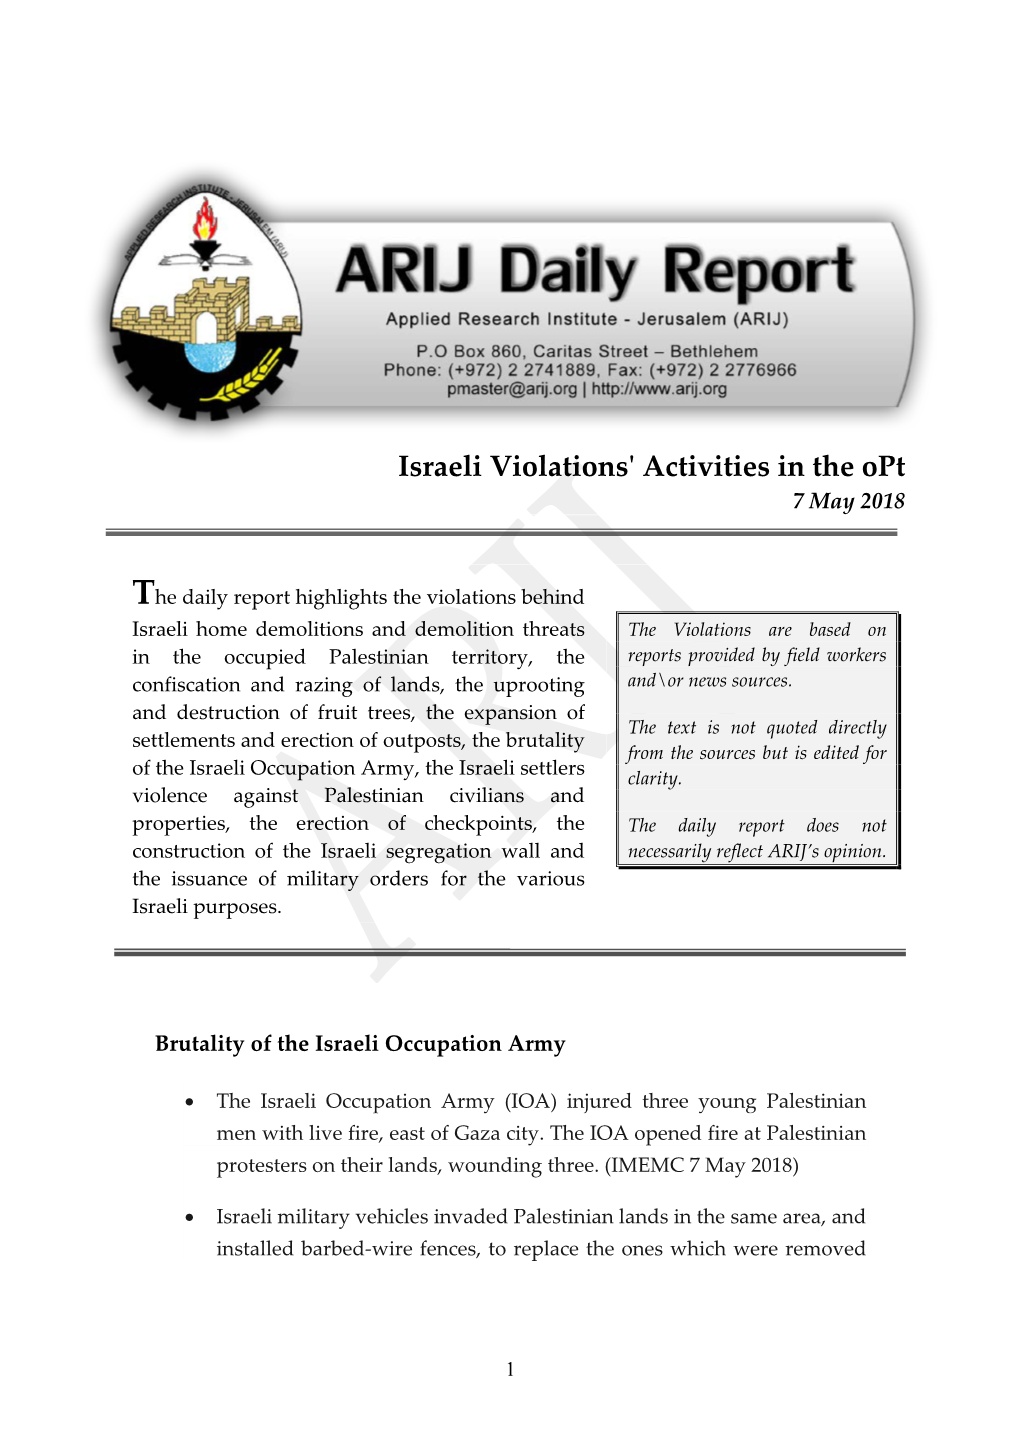 Israeli Violations' Activities in the Opt 7 May 2018